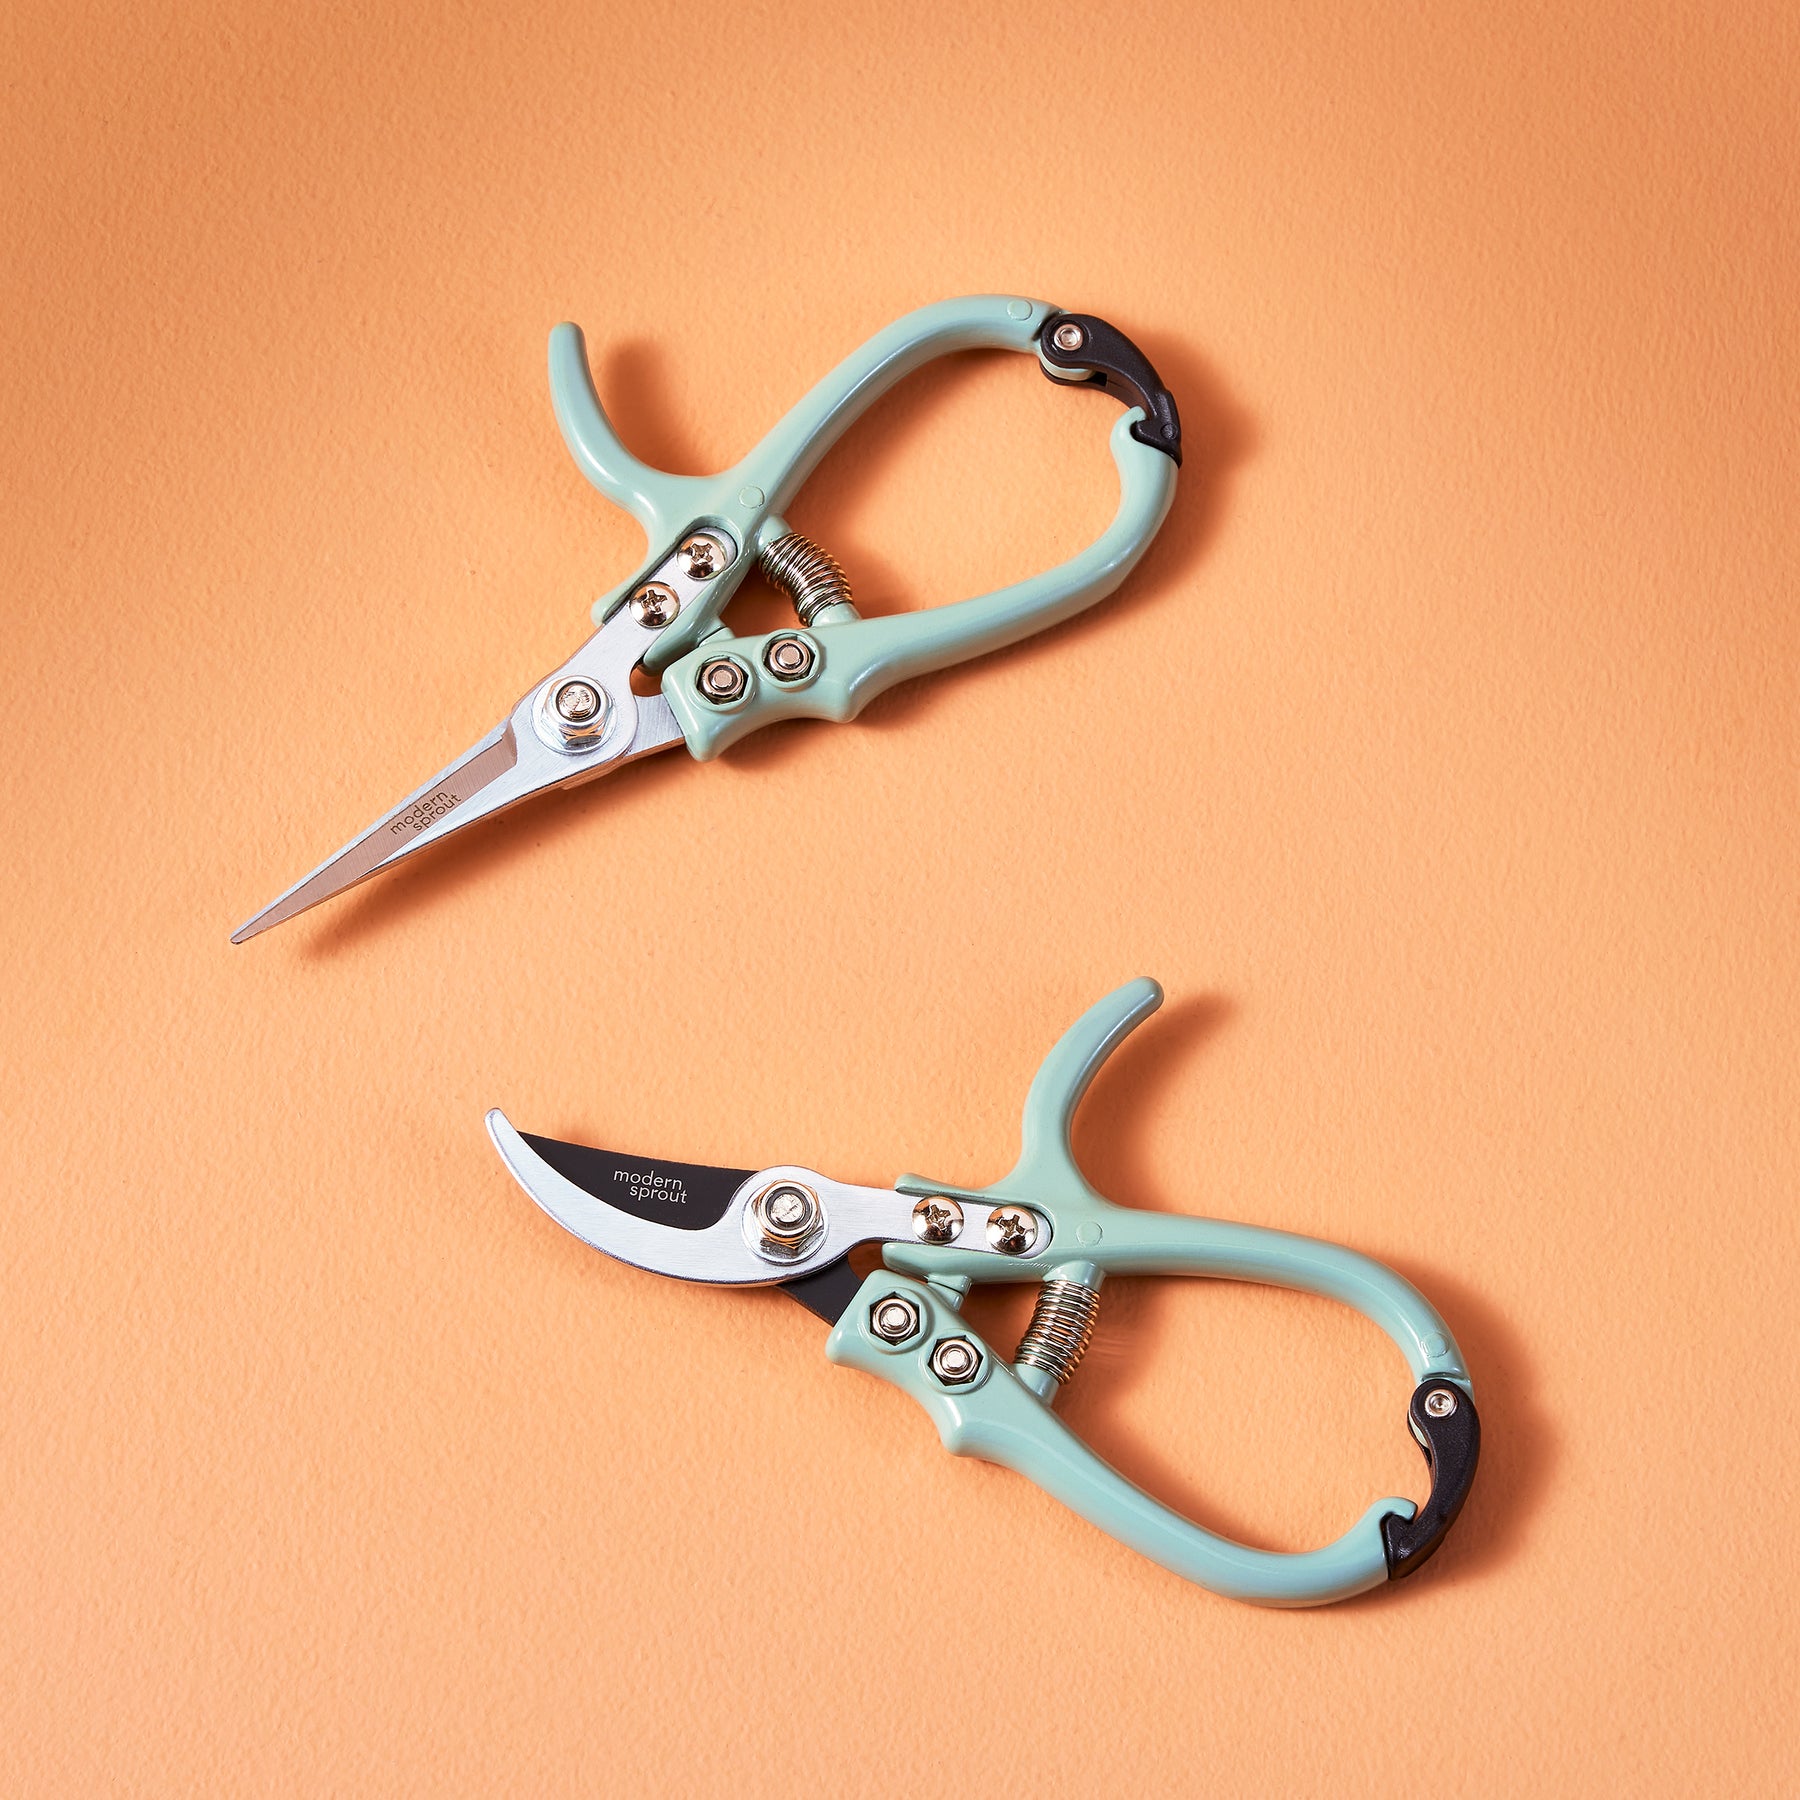 Modern Sprout Pruning Shears